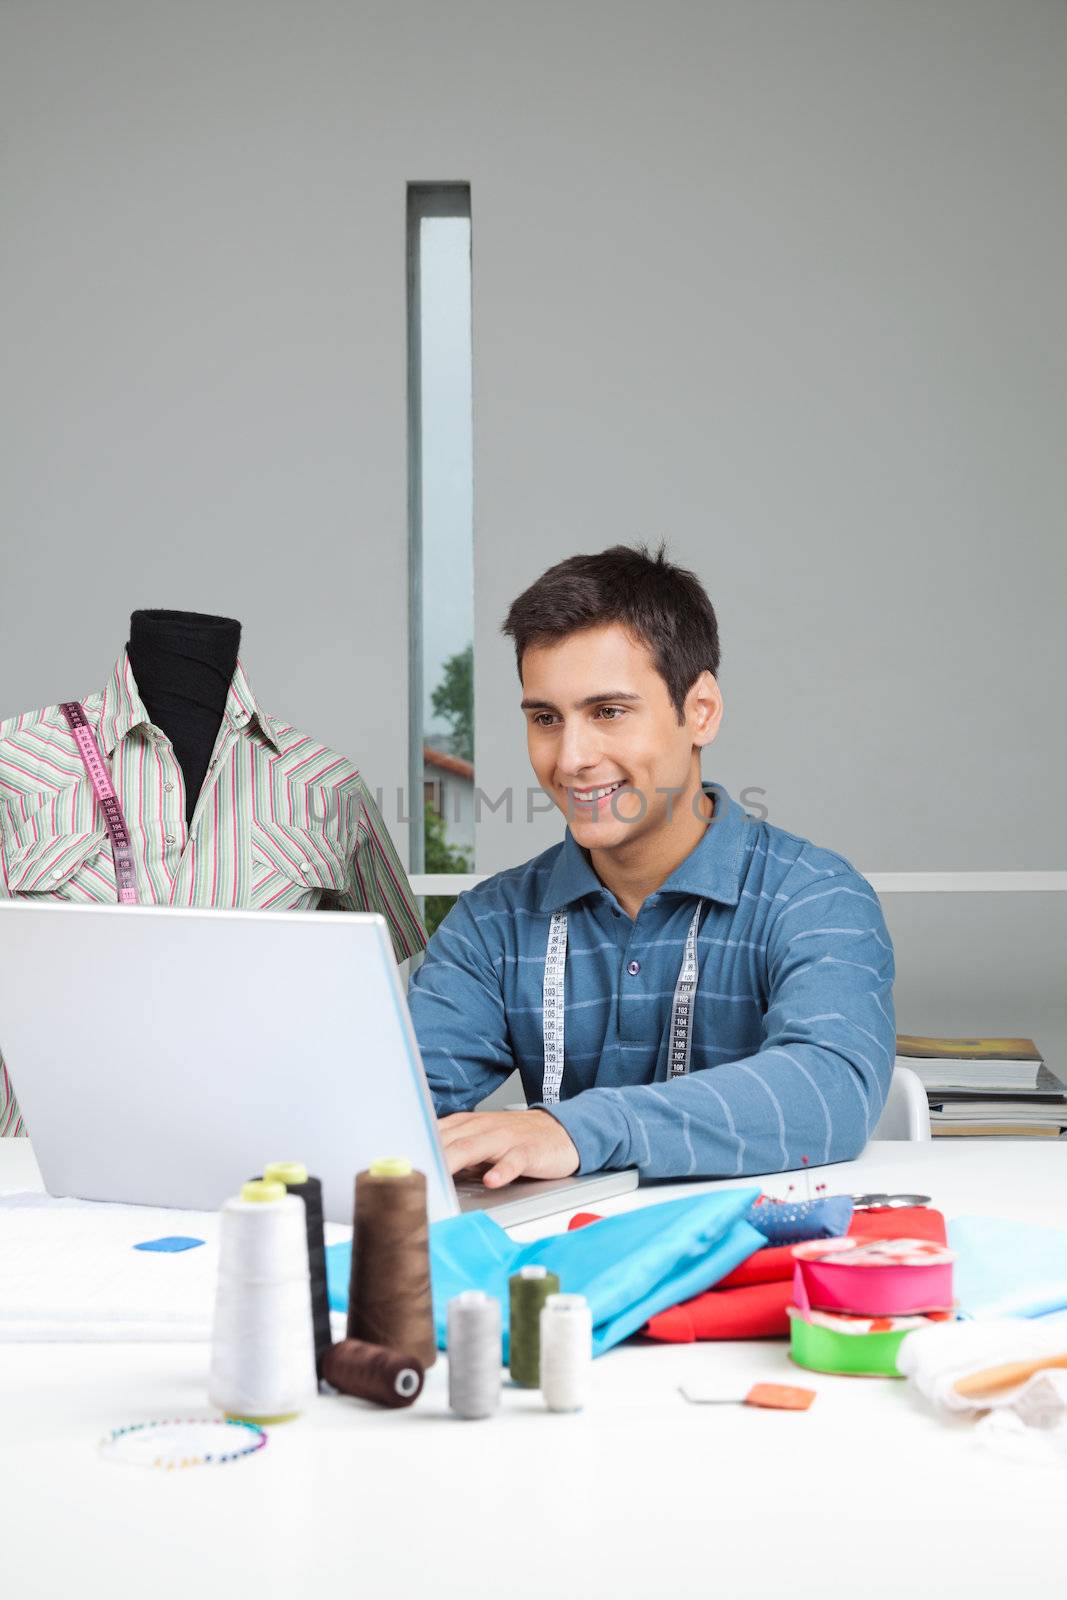 Happy male tailor using laptop while sitting by table with dressmaking accessories